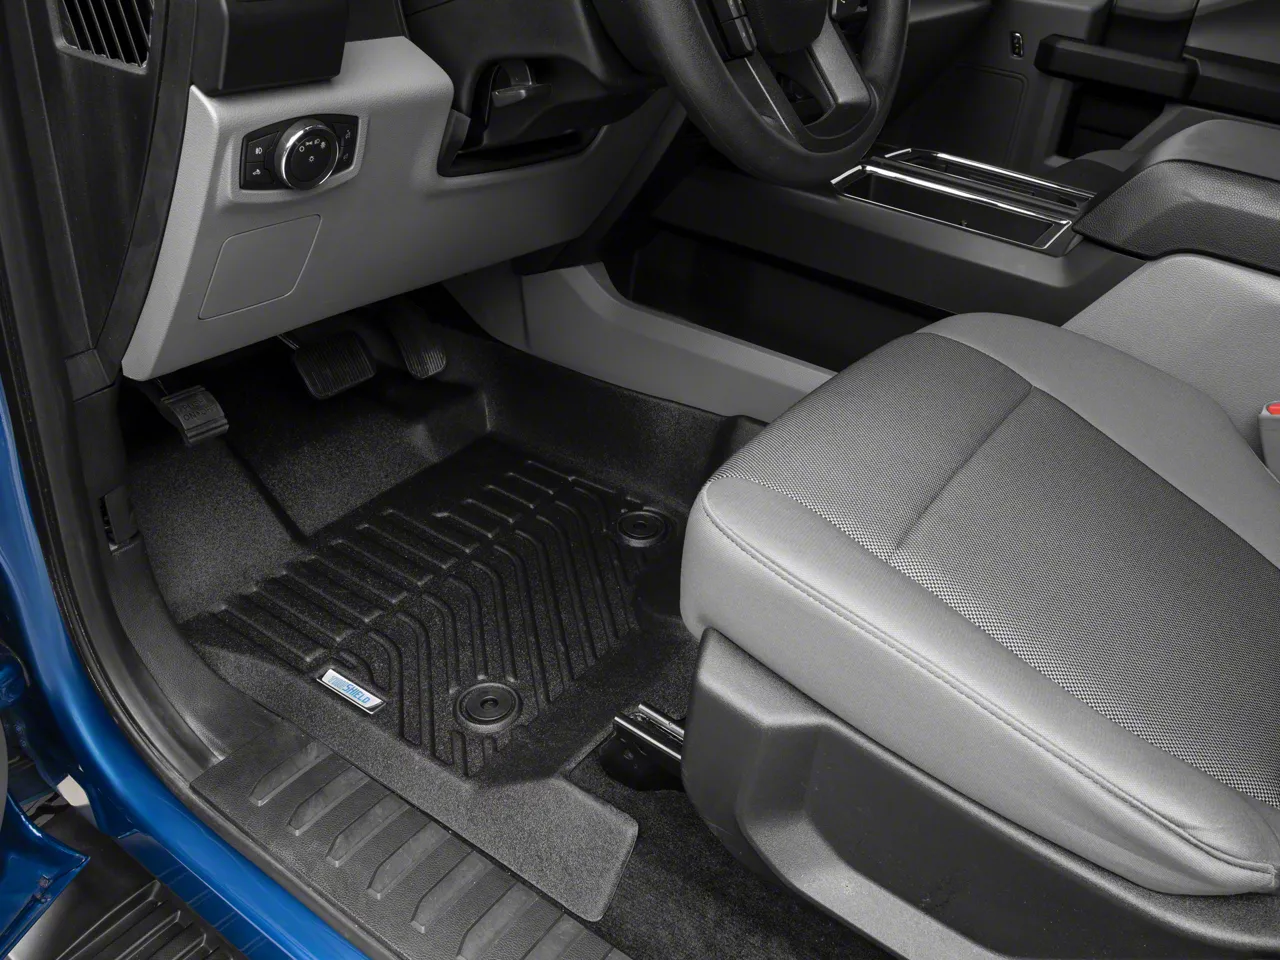 2007+ Sprinter Vans Heavy-Duty All-Weather Floor Mats: Ultimate Protection  for Any Condition